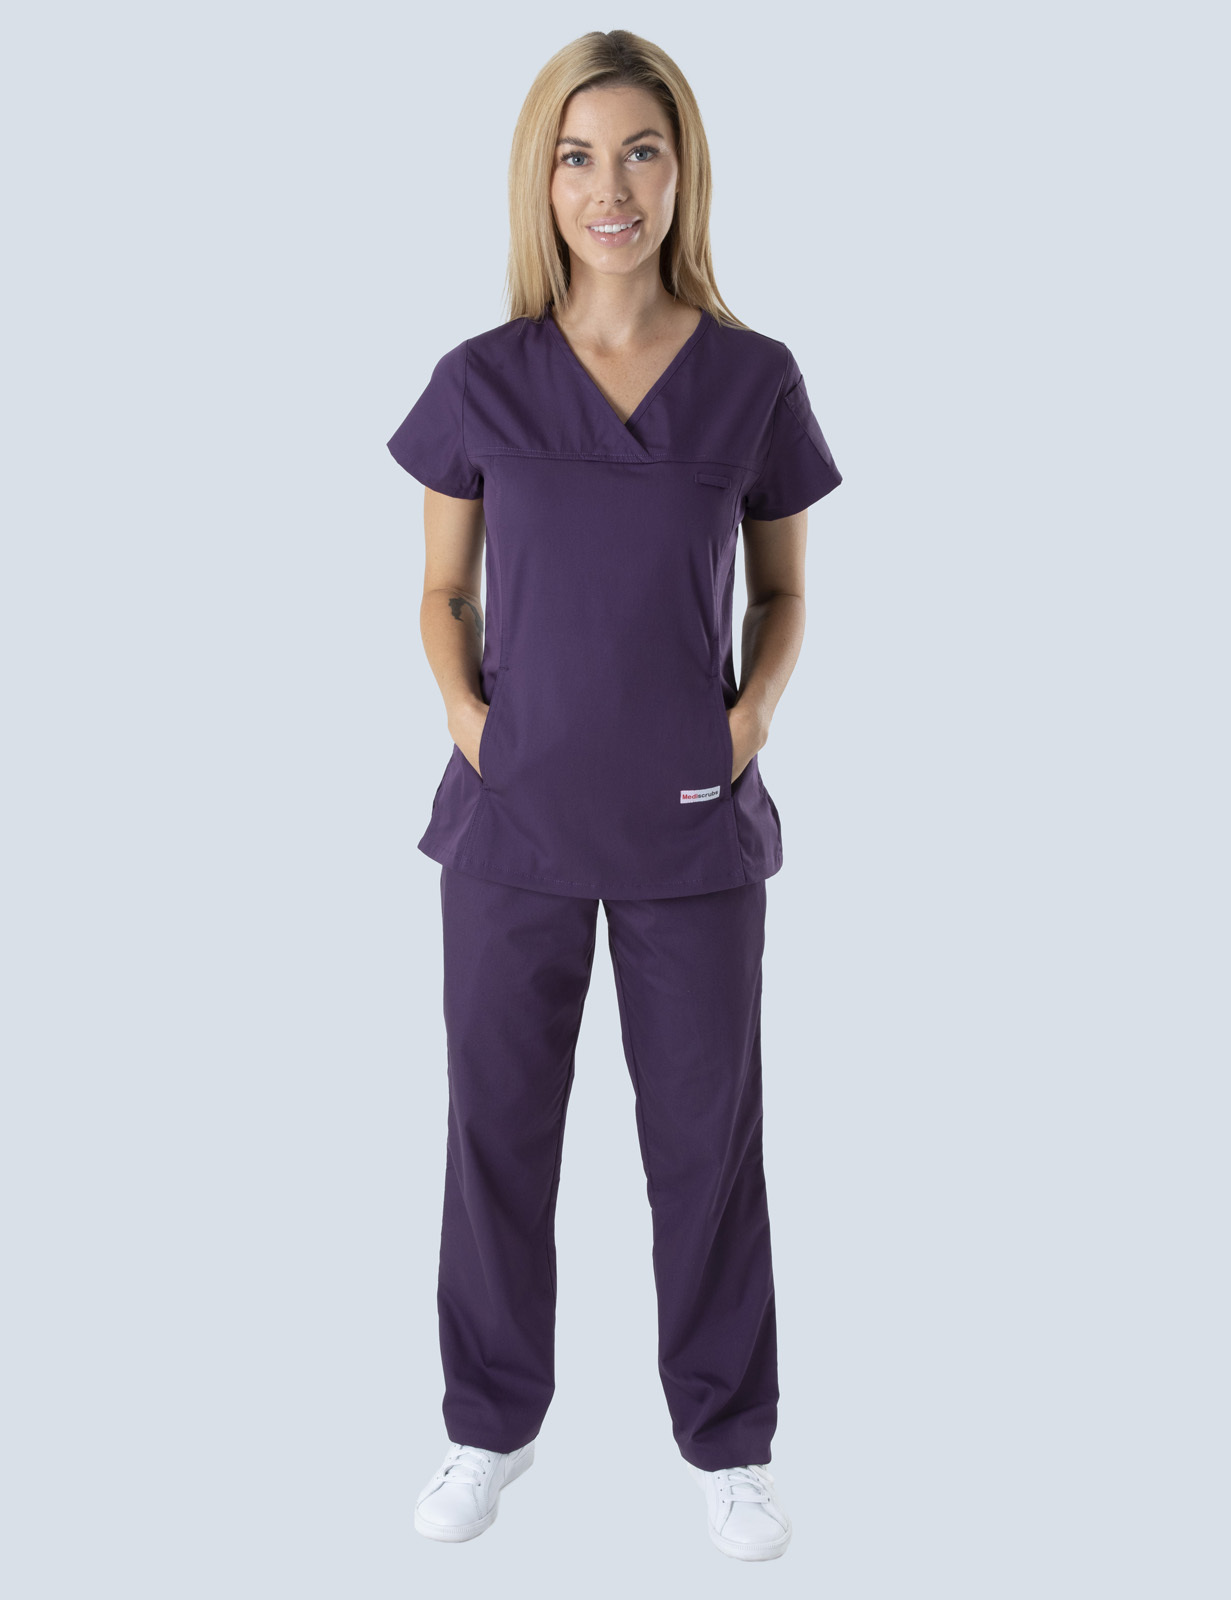 Gladstone Hospital - HDU Renal (Women's Fit Solid Scrub Top and Cargo Pants in Aubergine incl Logos)